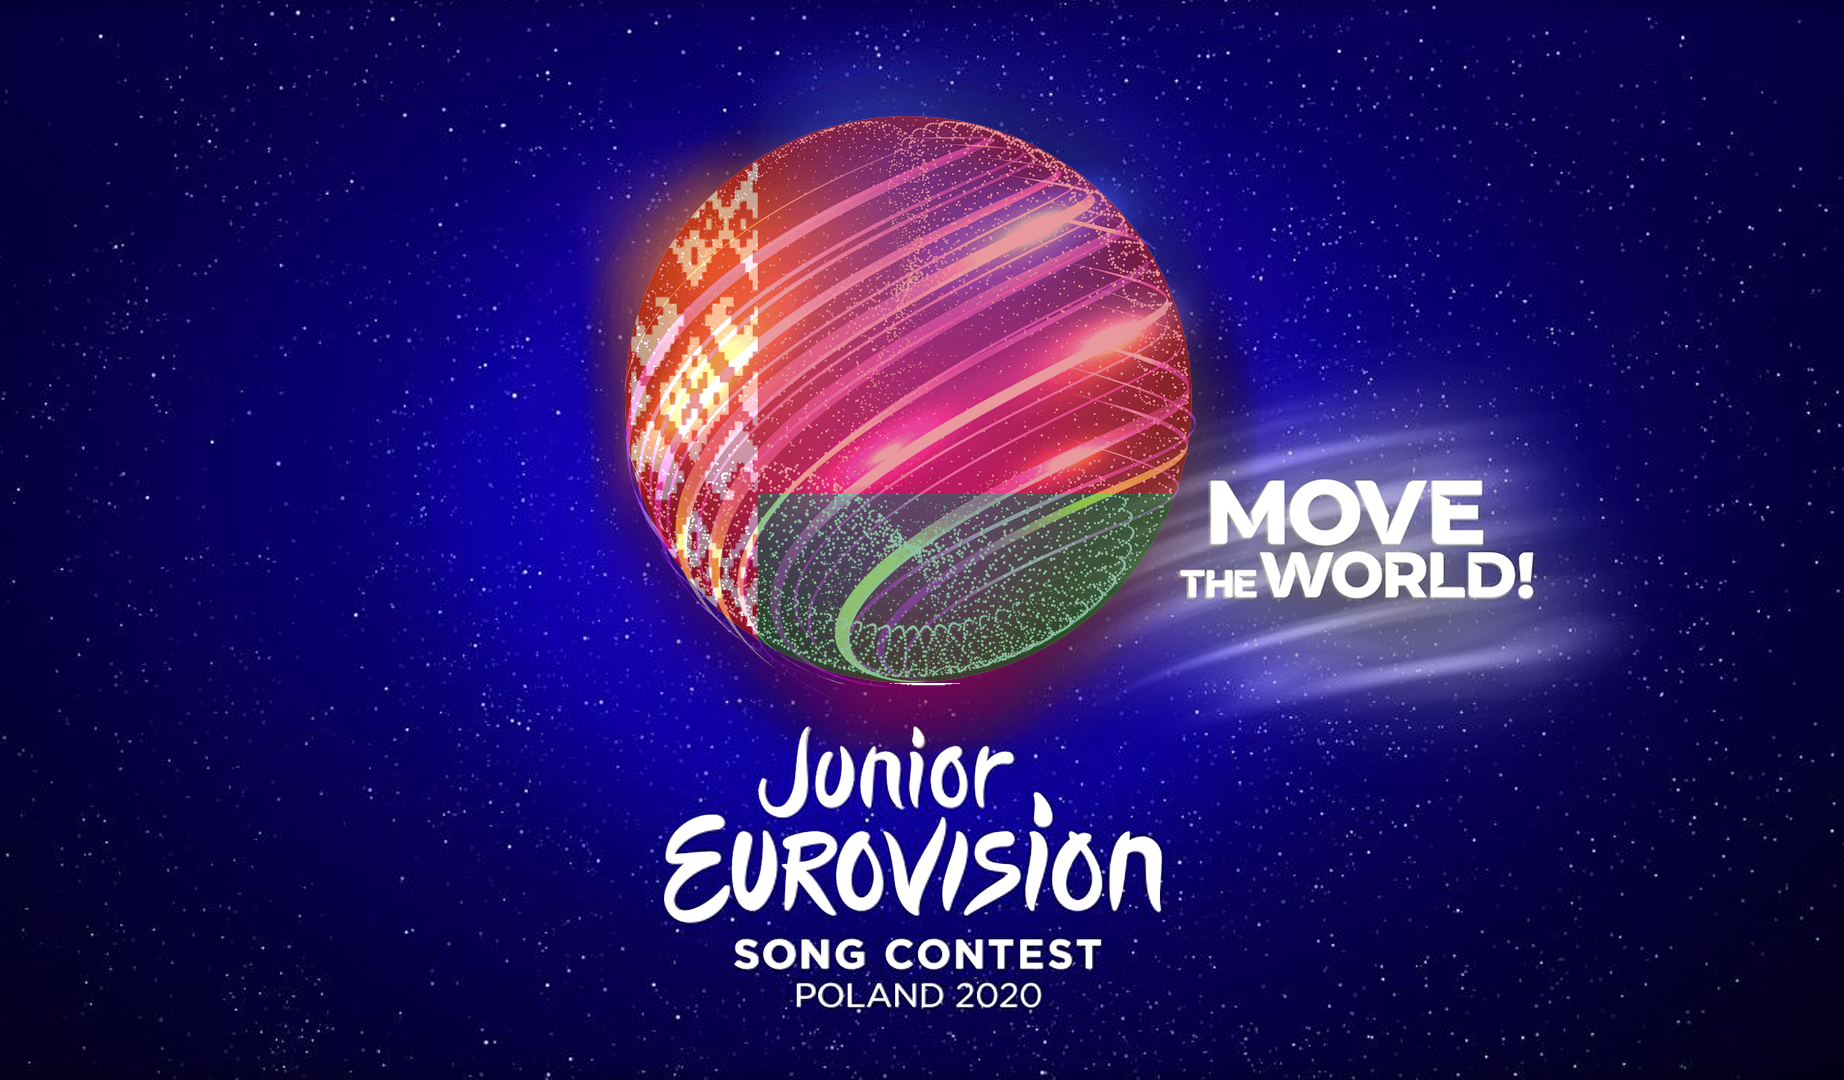 Junior Eurovision: Belarus opens song submissions without confirming participation